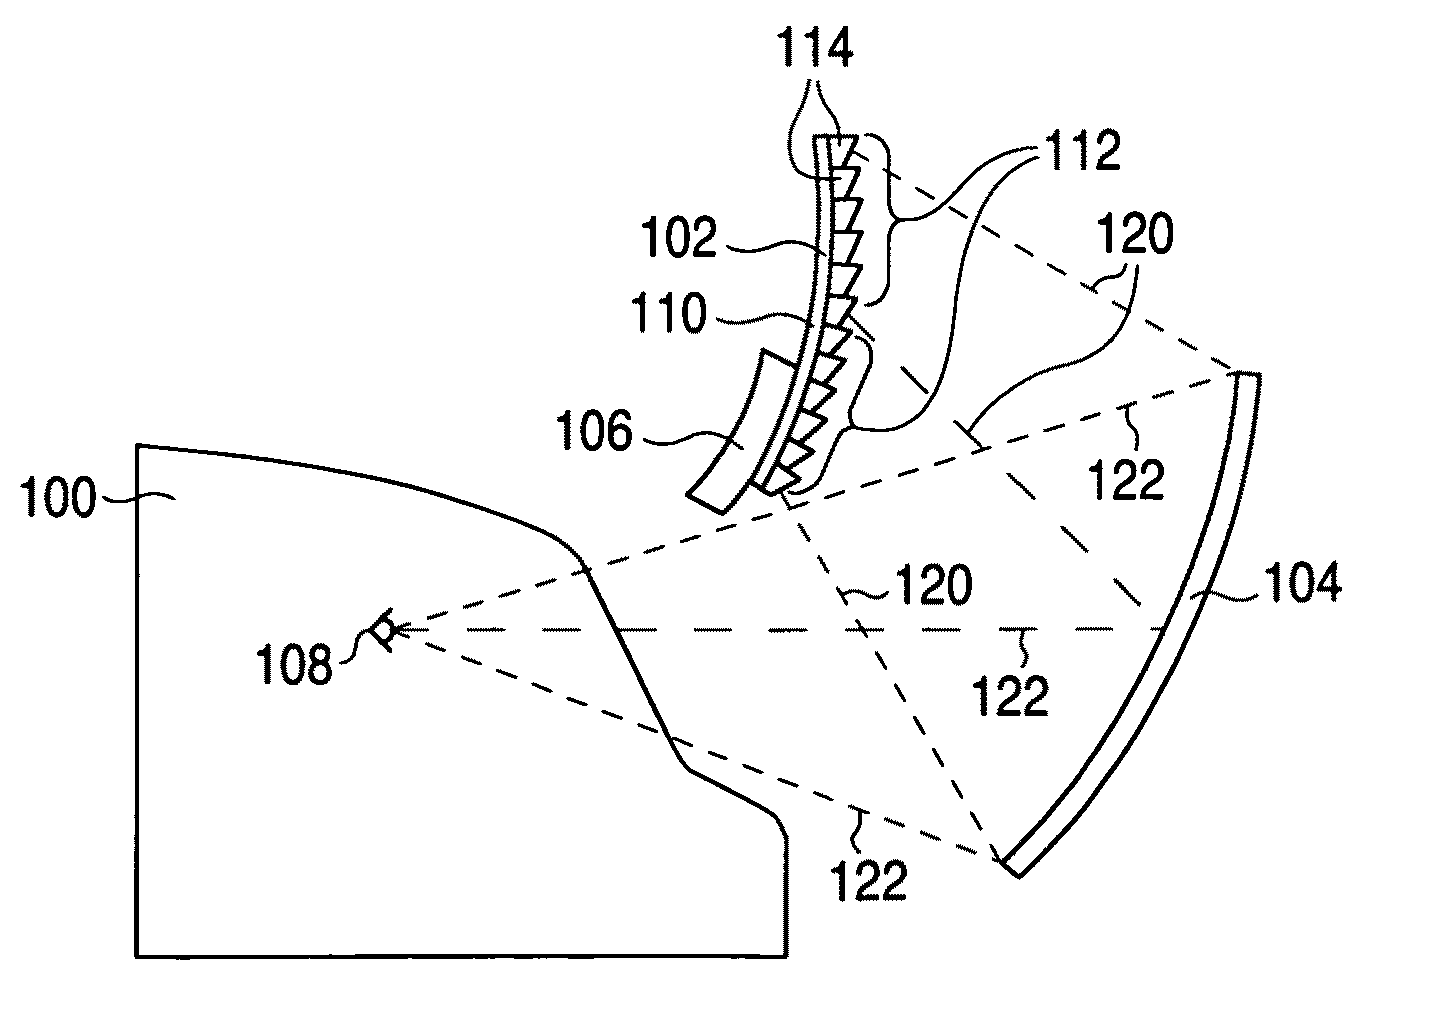 Motion Simulator, Display System, and Light-emissive Structures Typically Using Light-Emitting Diodes